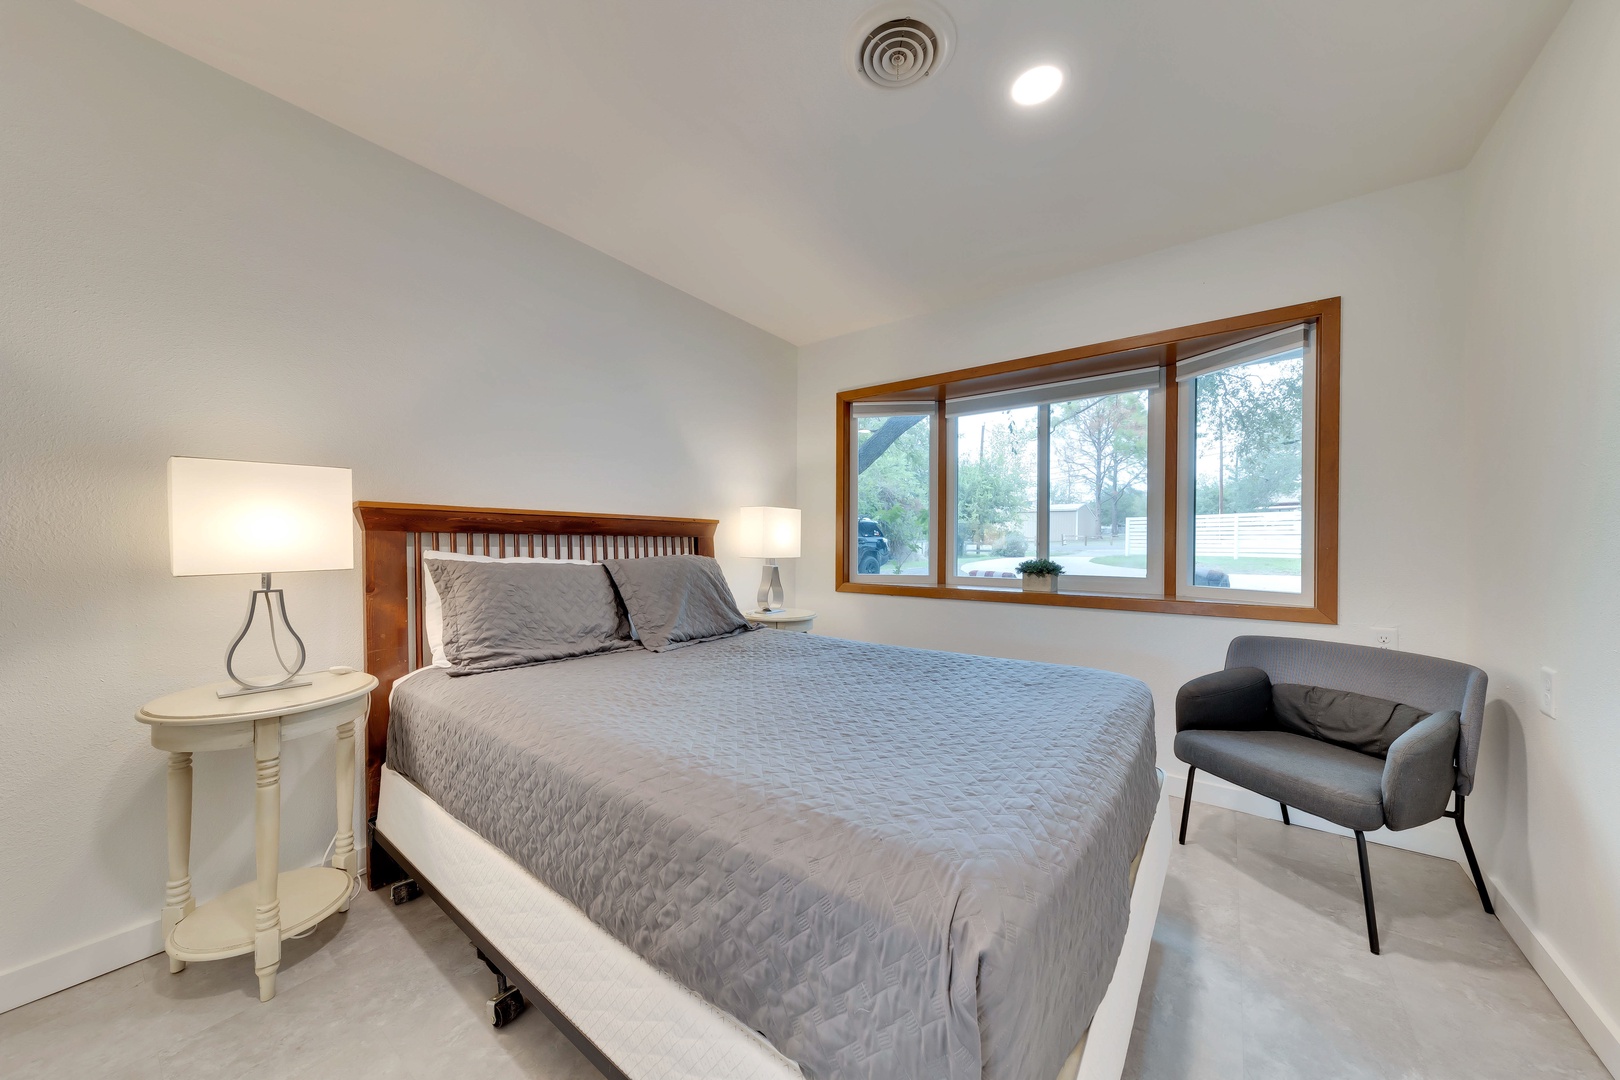 Enjoy the peace & quiet of the 3rd bedroom, with a queen bed & bay window